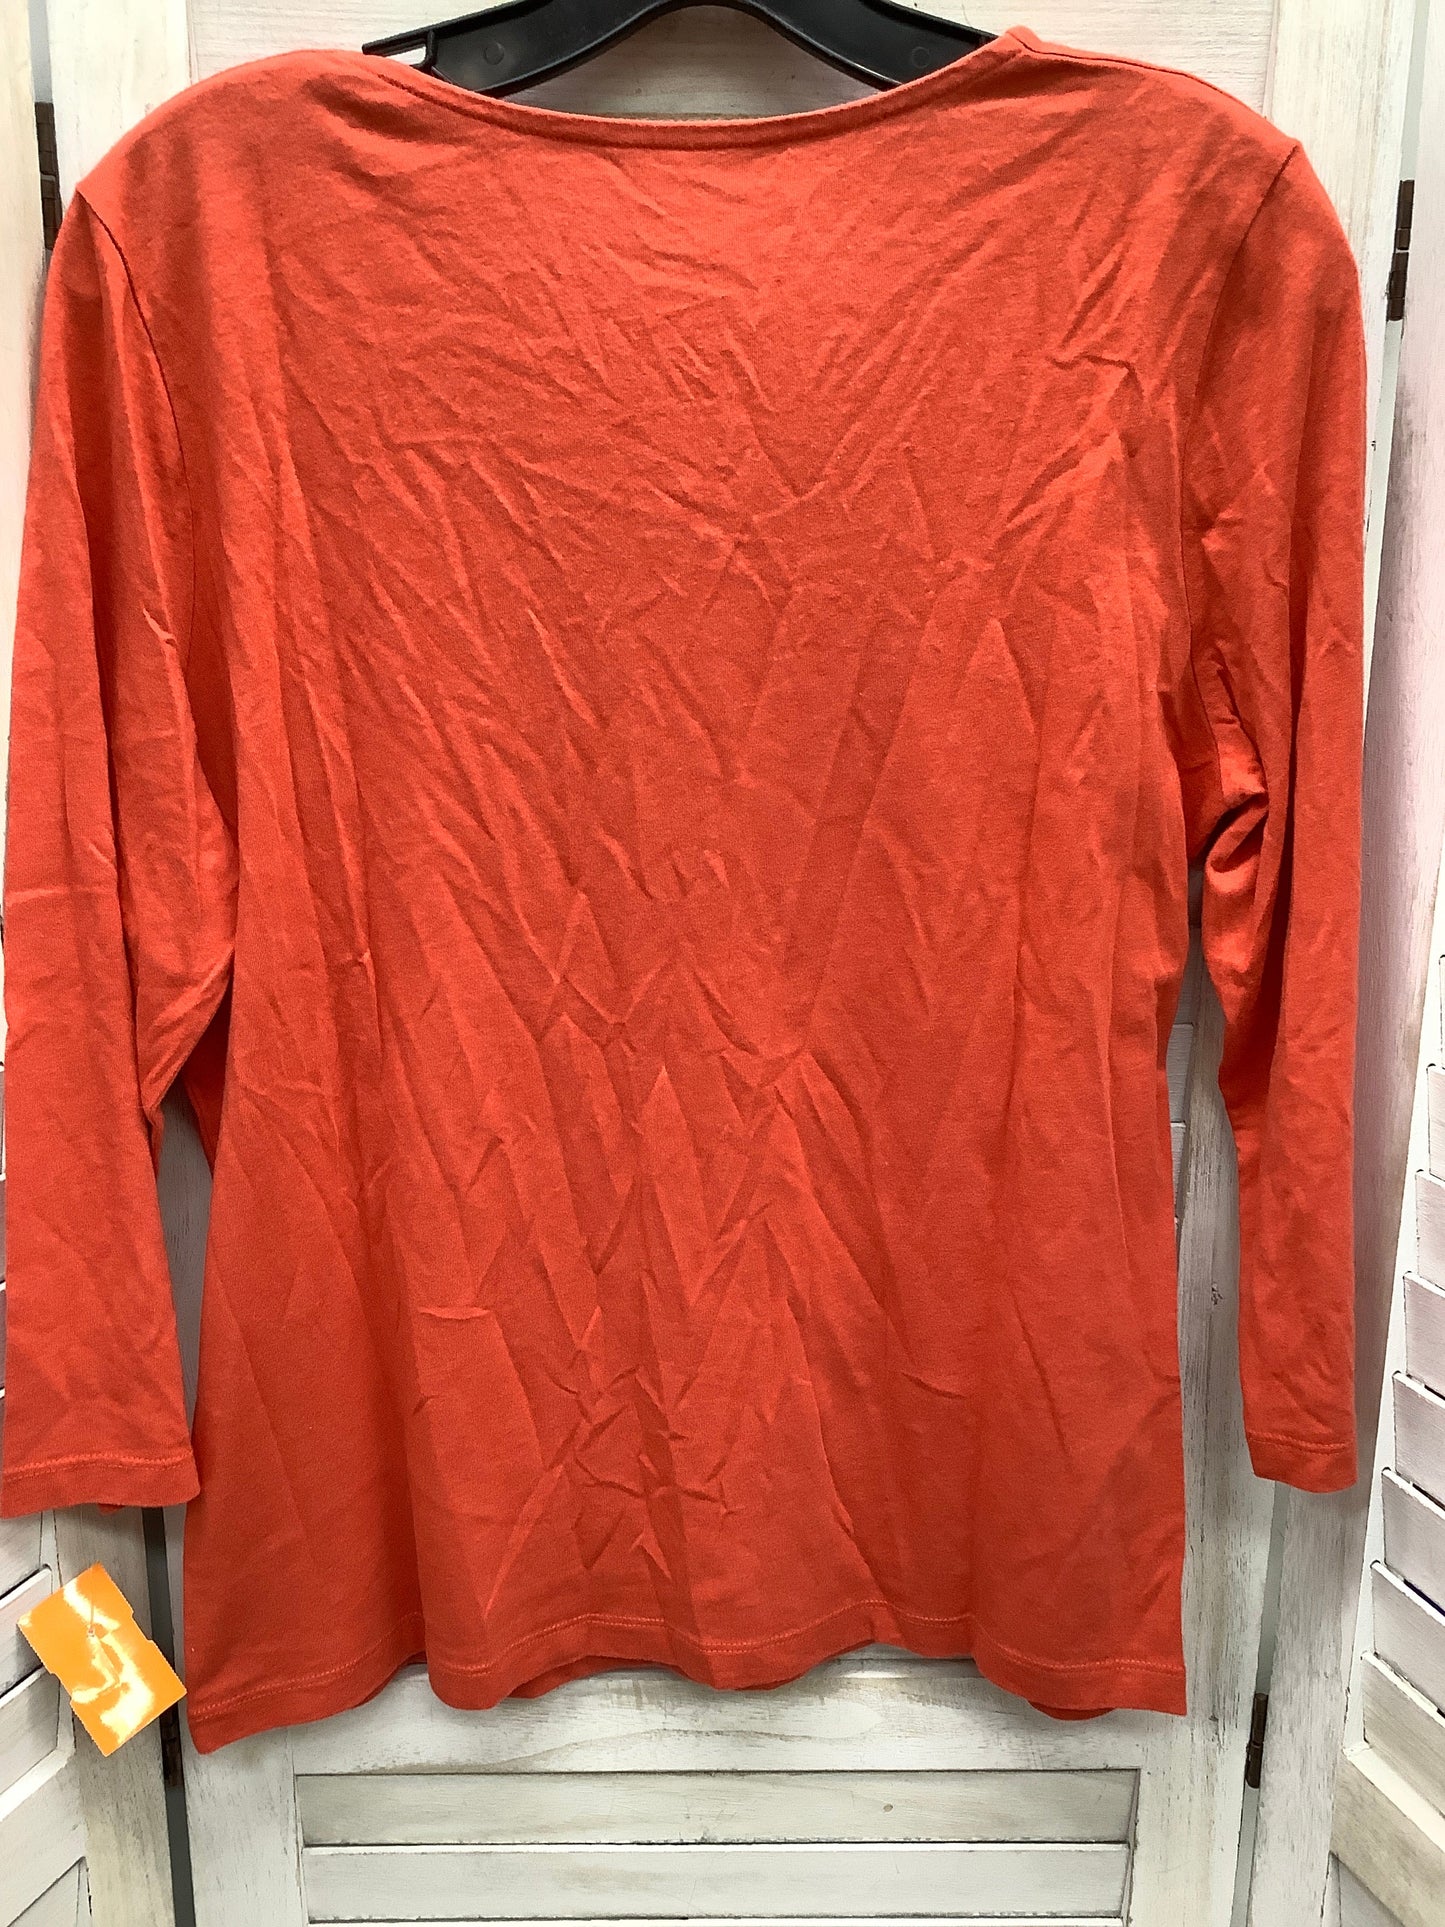 Coral Top 3/4 Sleeve Talbots, Size Large